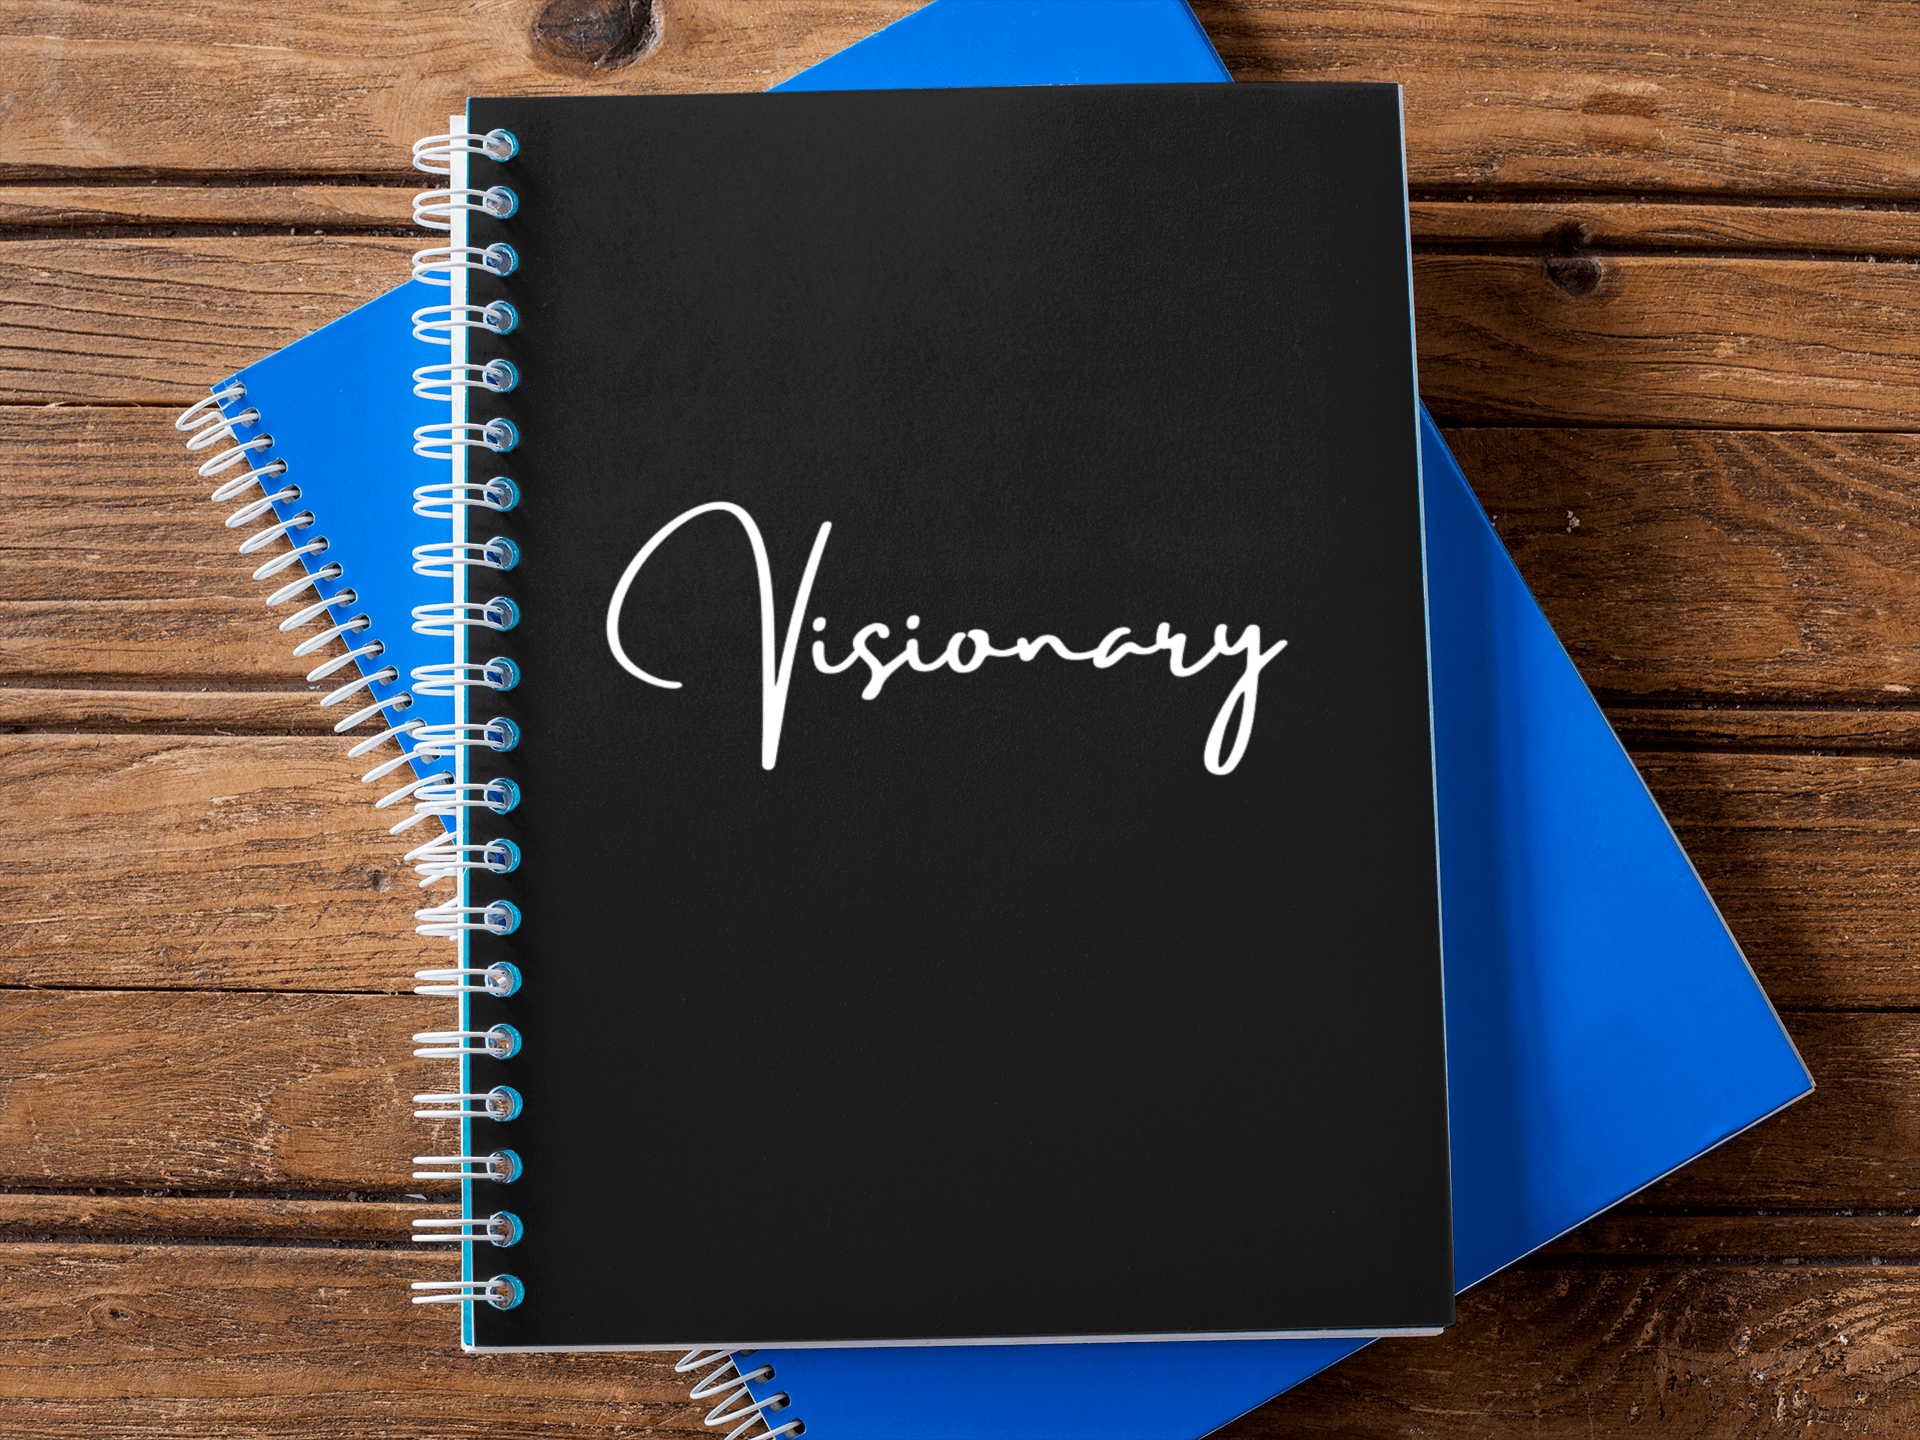 Visionary Notebook (Black Cover) - Women Empowerment T-Shirts & Apparel | CP Designs Unlimited